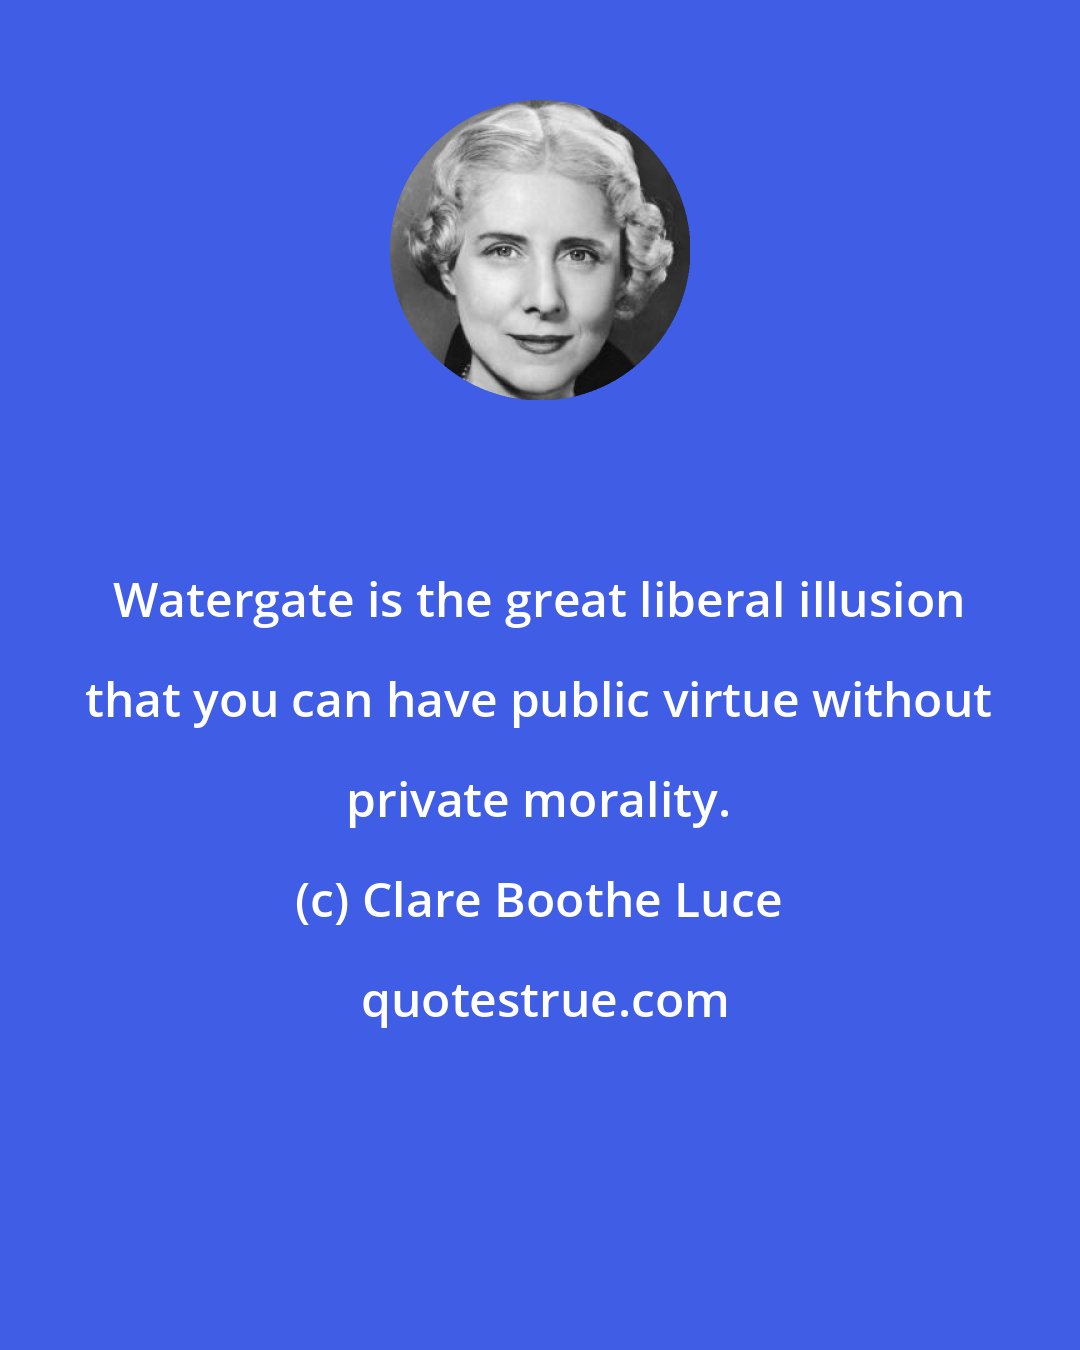 Clare Boothe Luce: Watergate is the great liberal illusion that you can have public virtue without private morality.